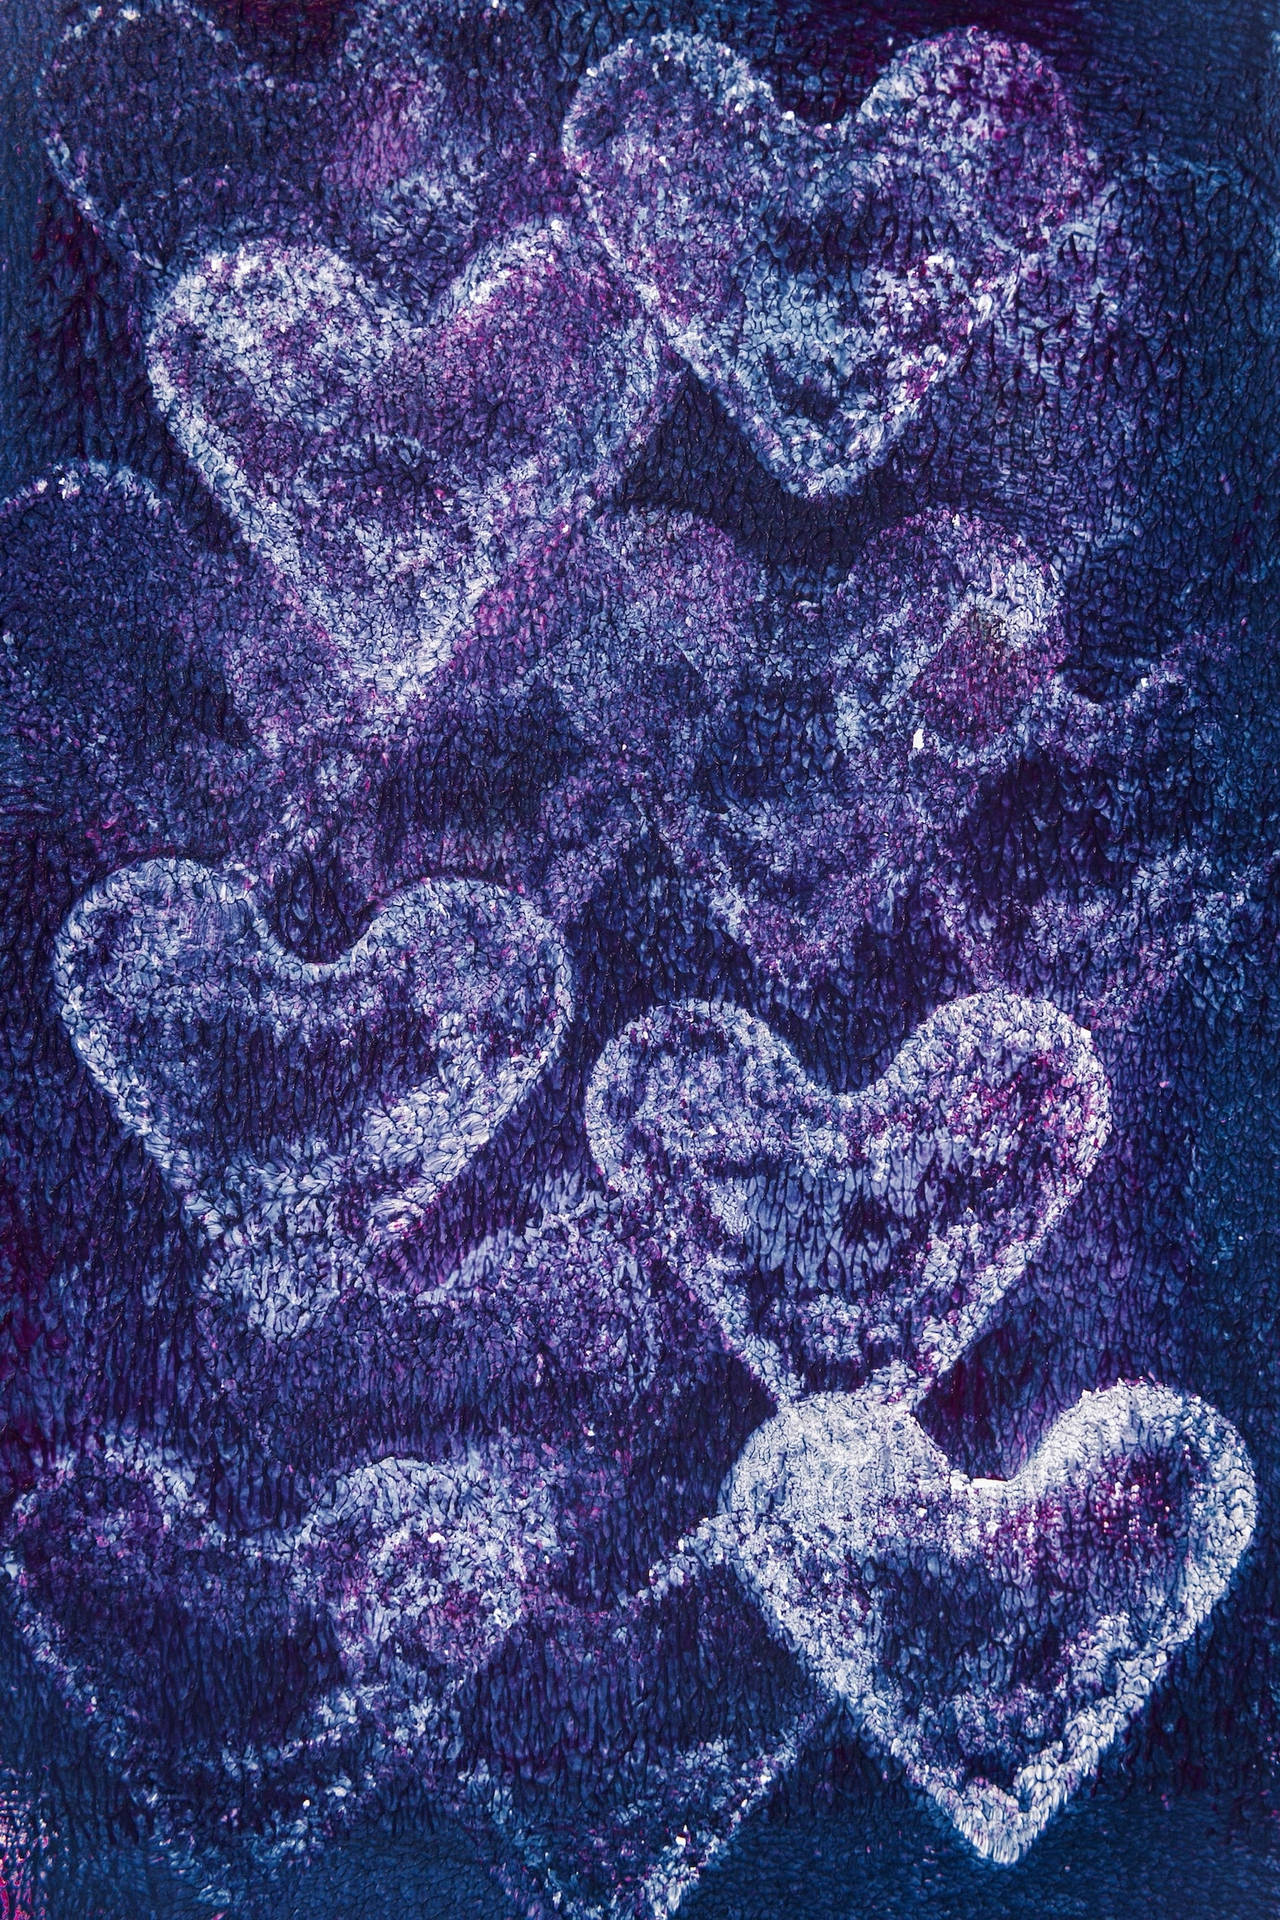 Purple And White Heart Rough Texture